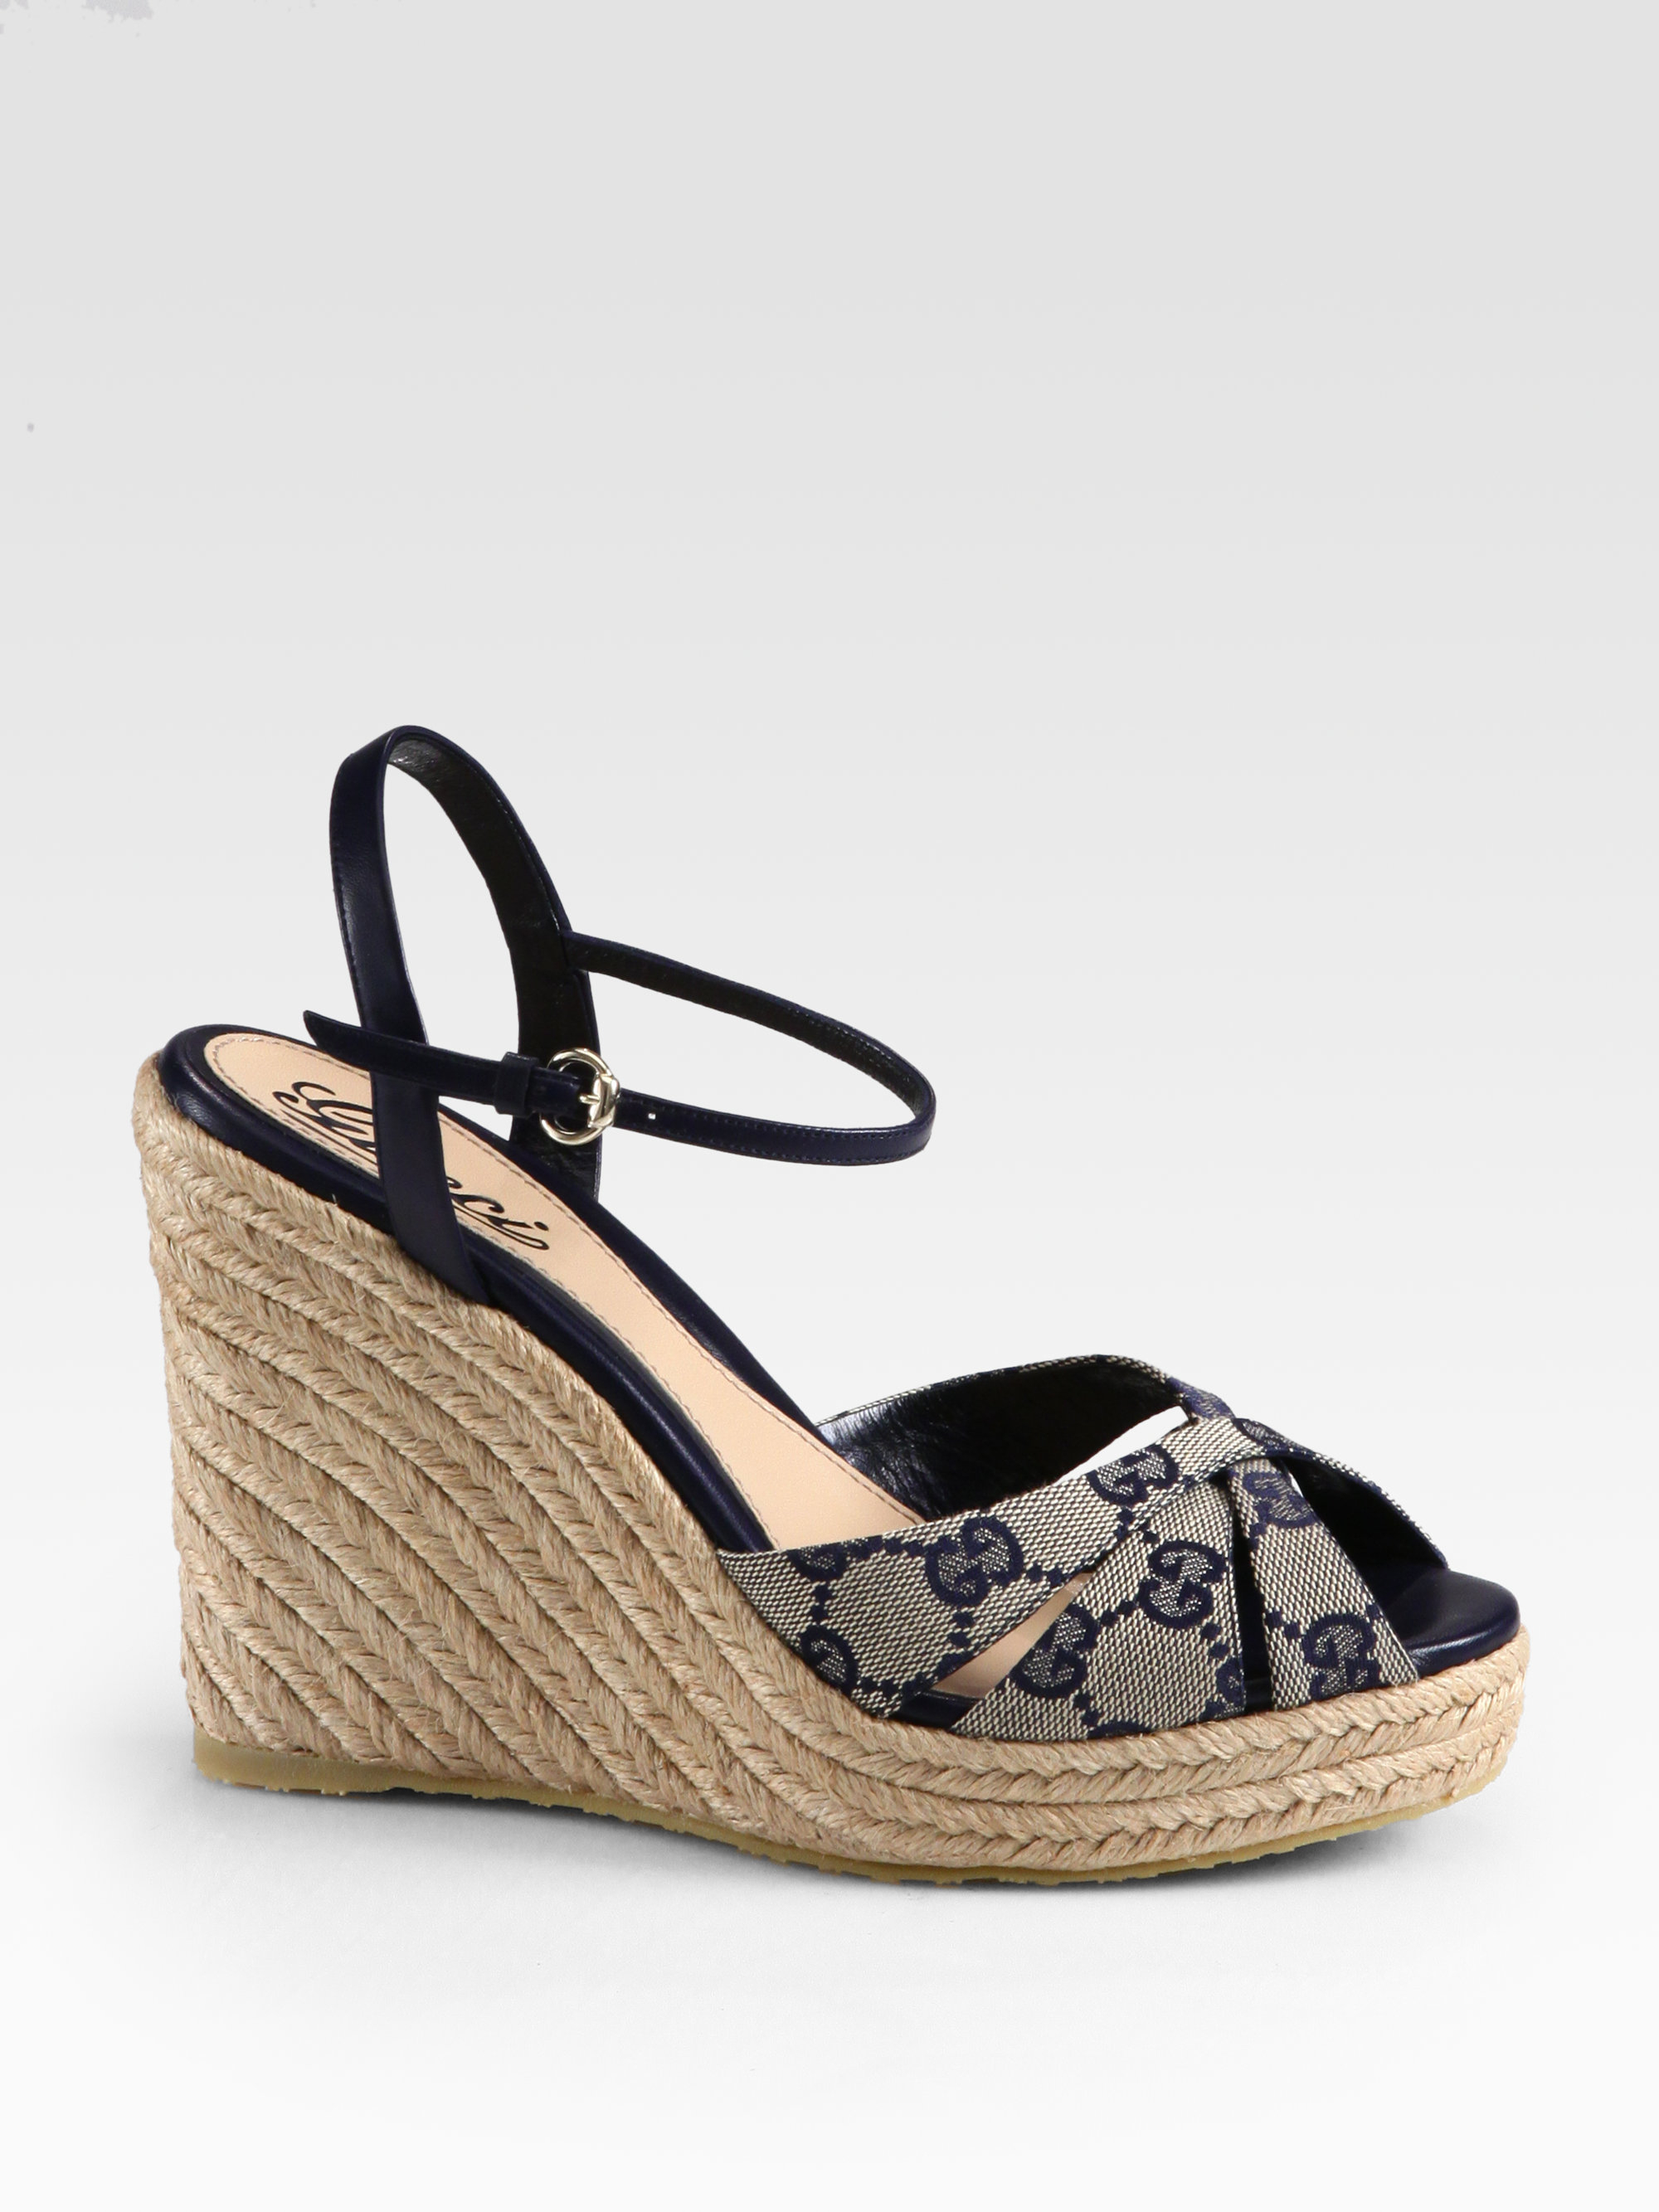 Lyst - Gucci Penelope Gg Canvas Espadrille Wedges in Blue